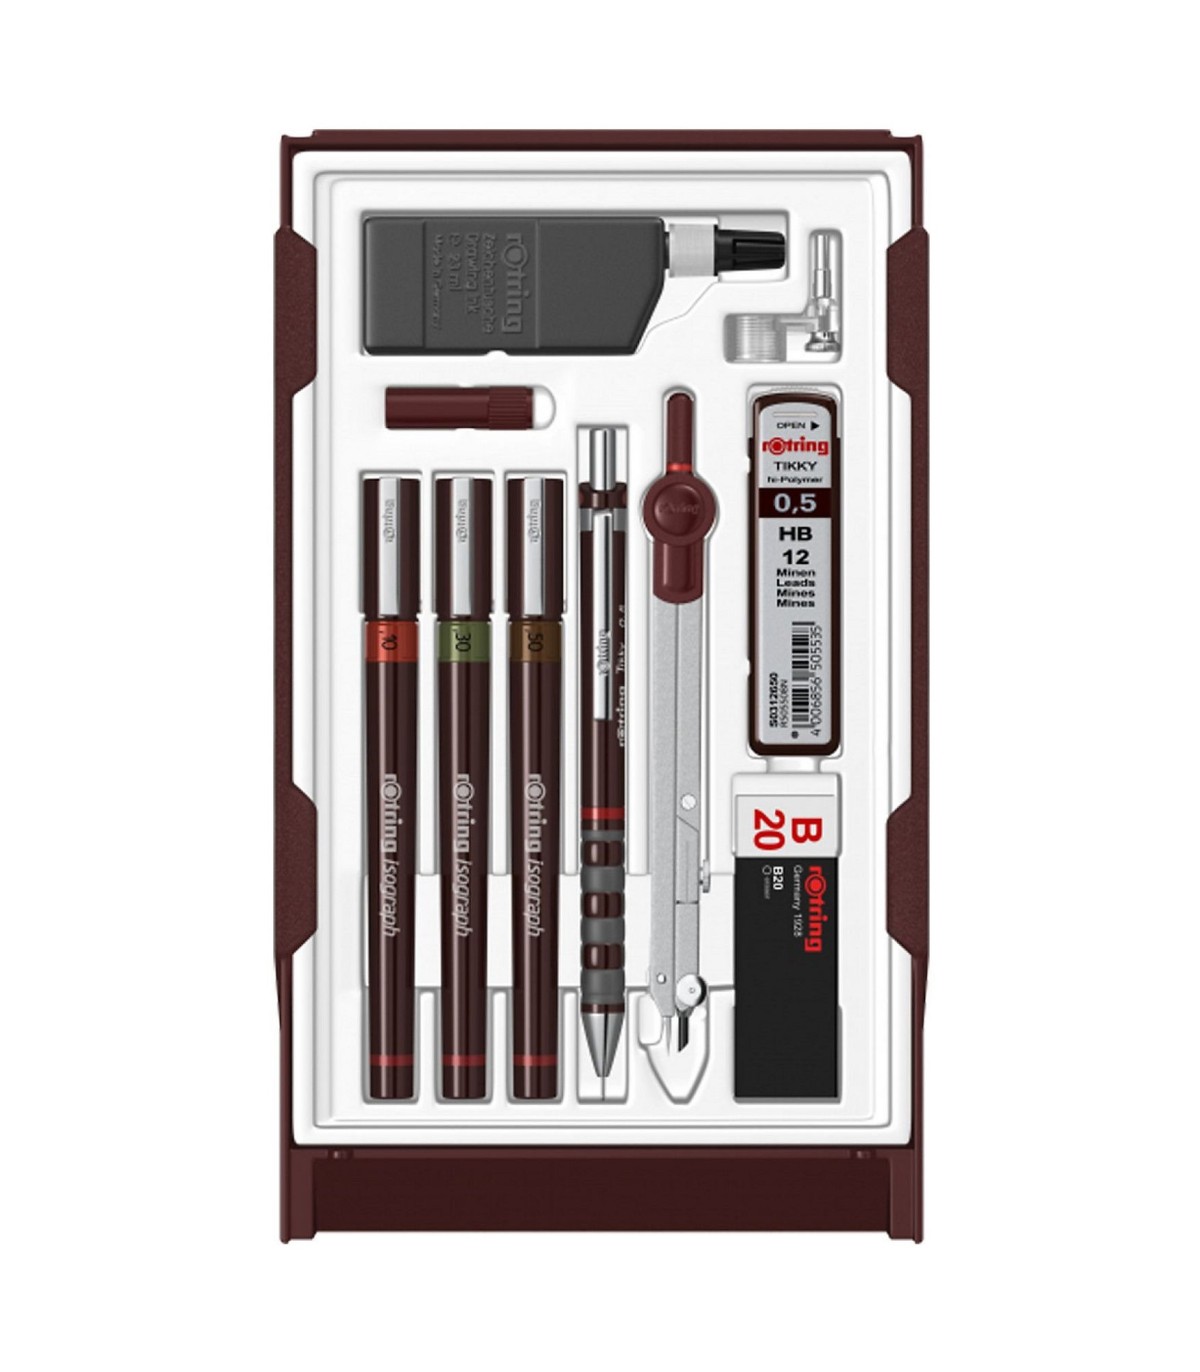 rOtring Master Set: 3 Isograph pens 0.1 - 0.3 - 0.5 mm + Tikky Mechanical  Pencil 0.5 + 12 HB leads + B20 eraser + Centro compass